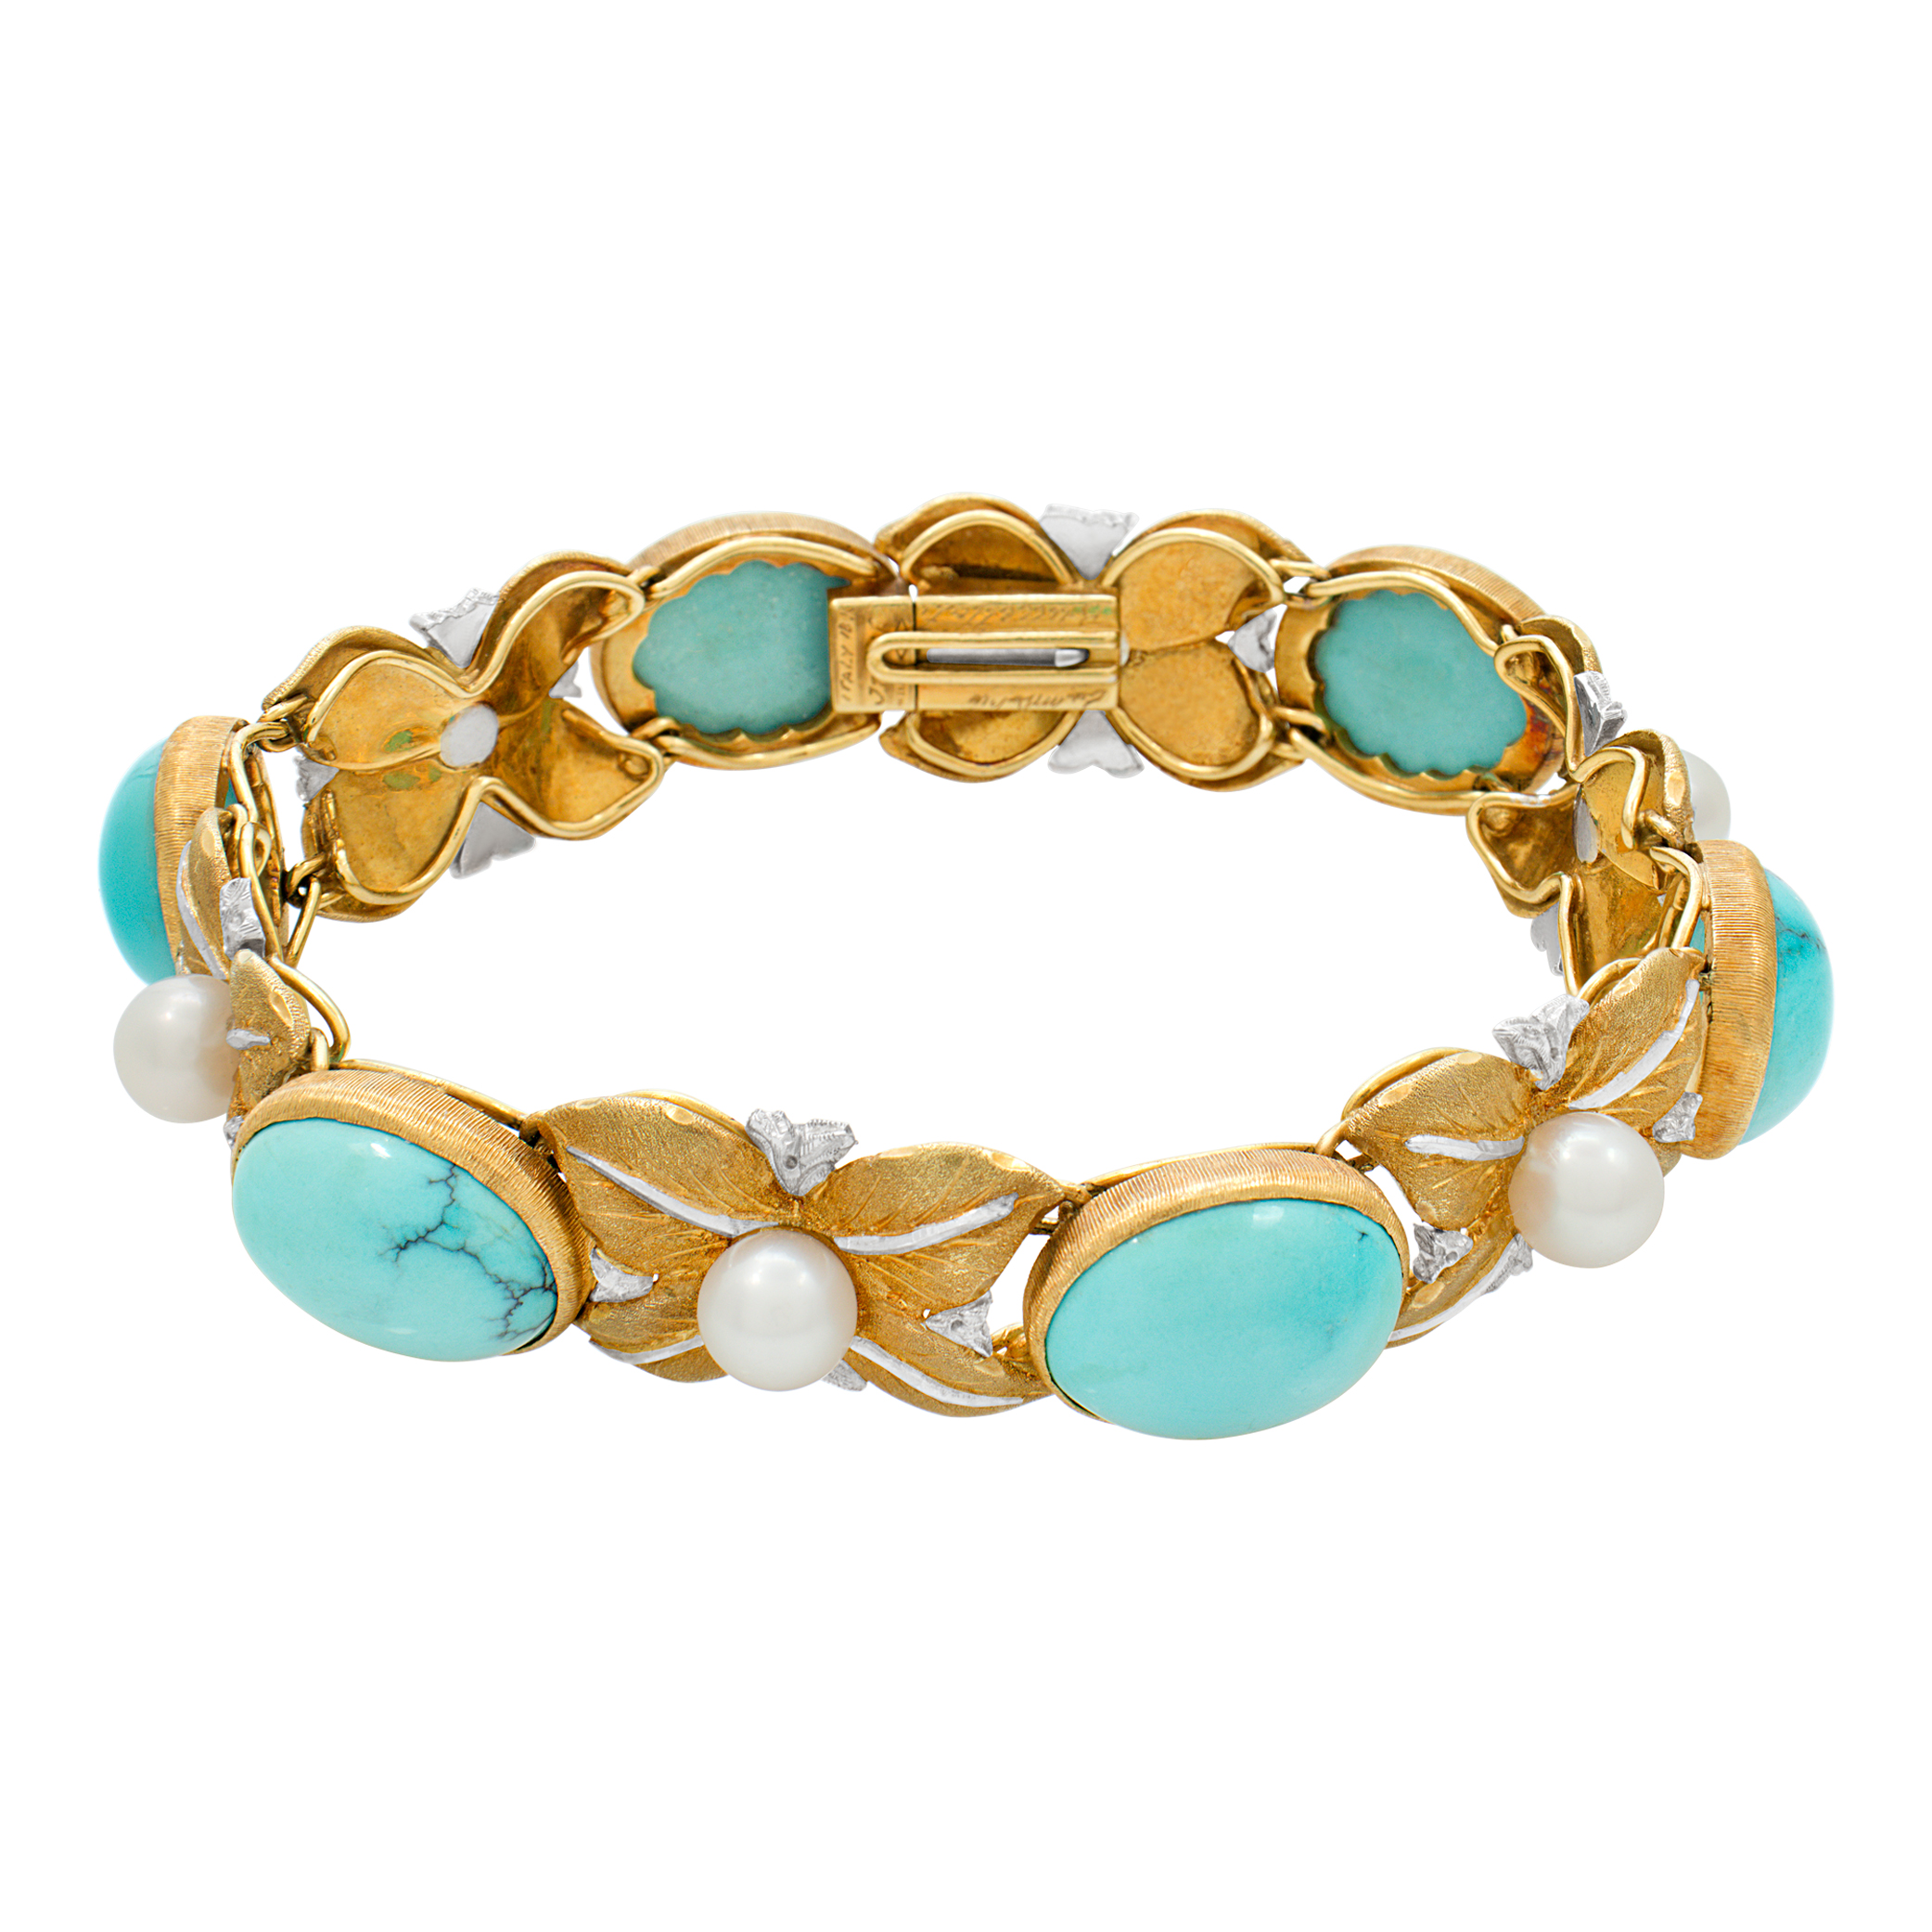 Vintage Italian designer Buccellati pearl and cabochon turquoise bracelet in 18k yellow & white gold.